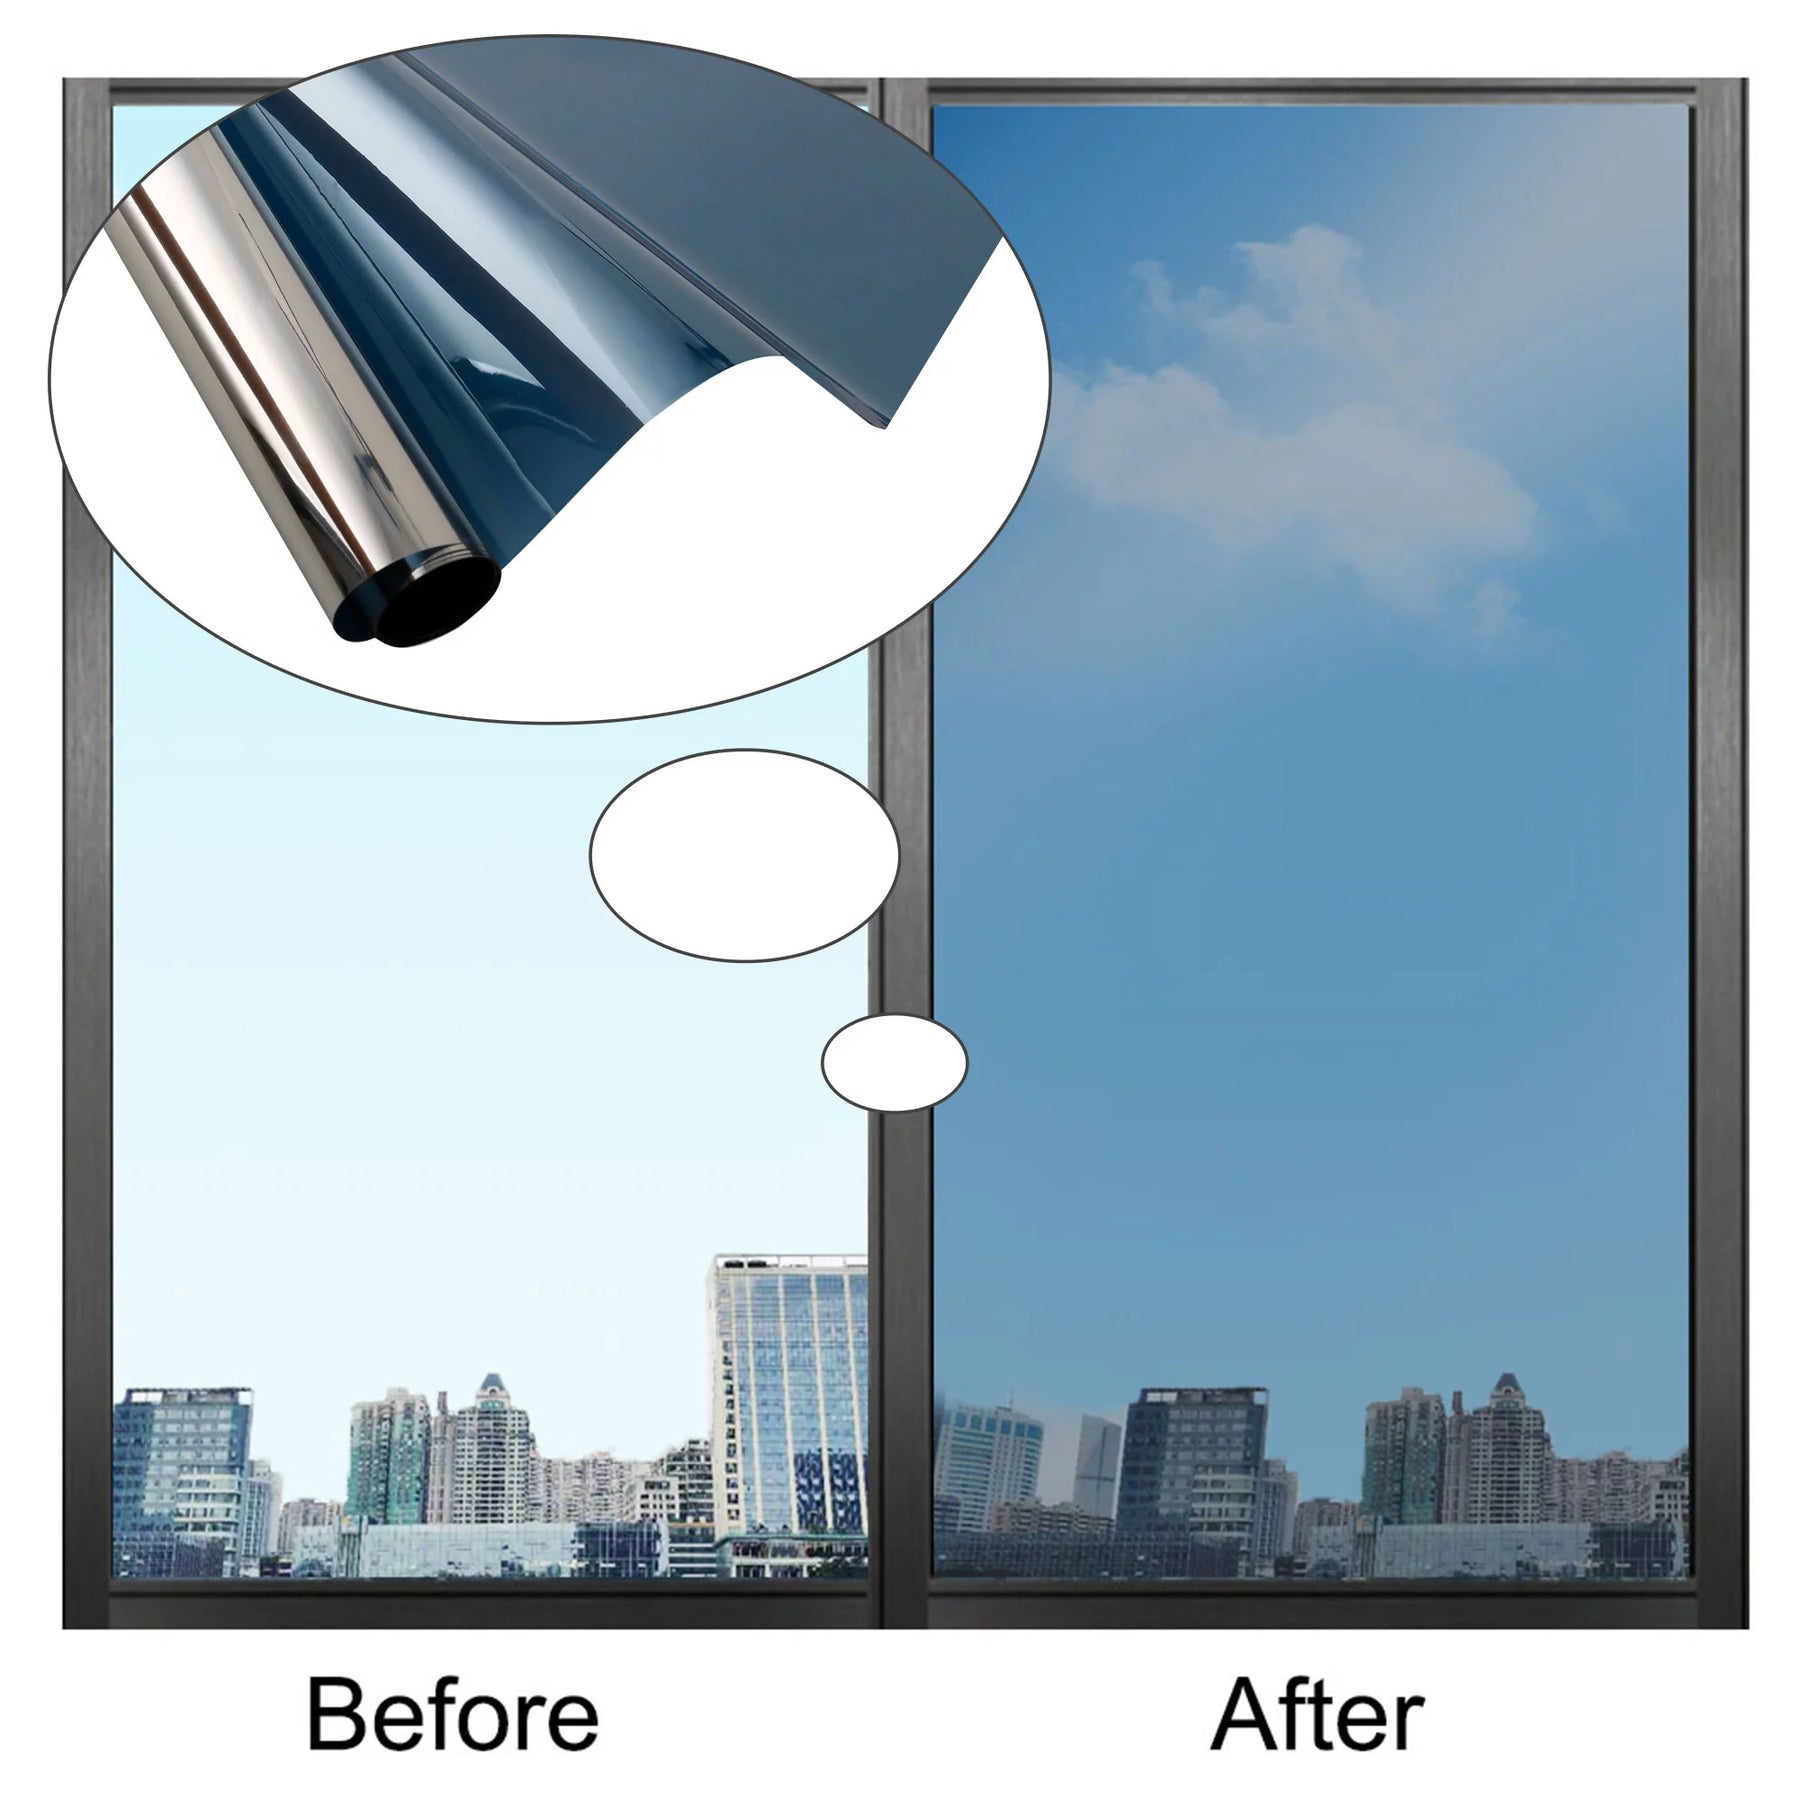 Can window film be used on all types of glass surfaces?